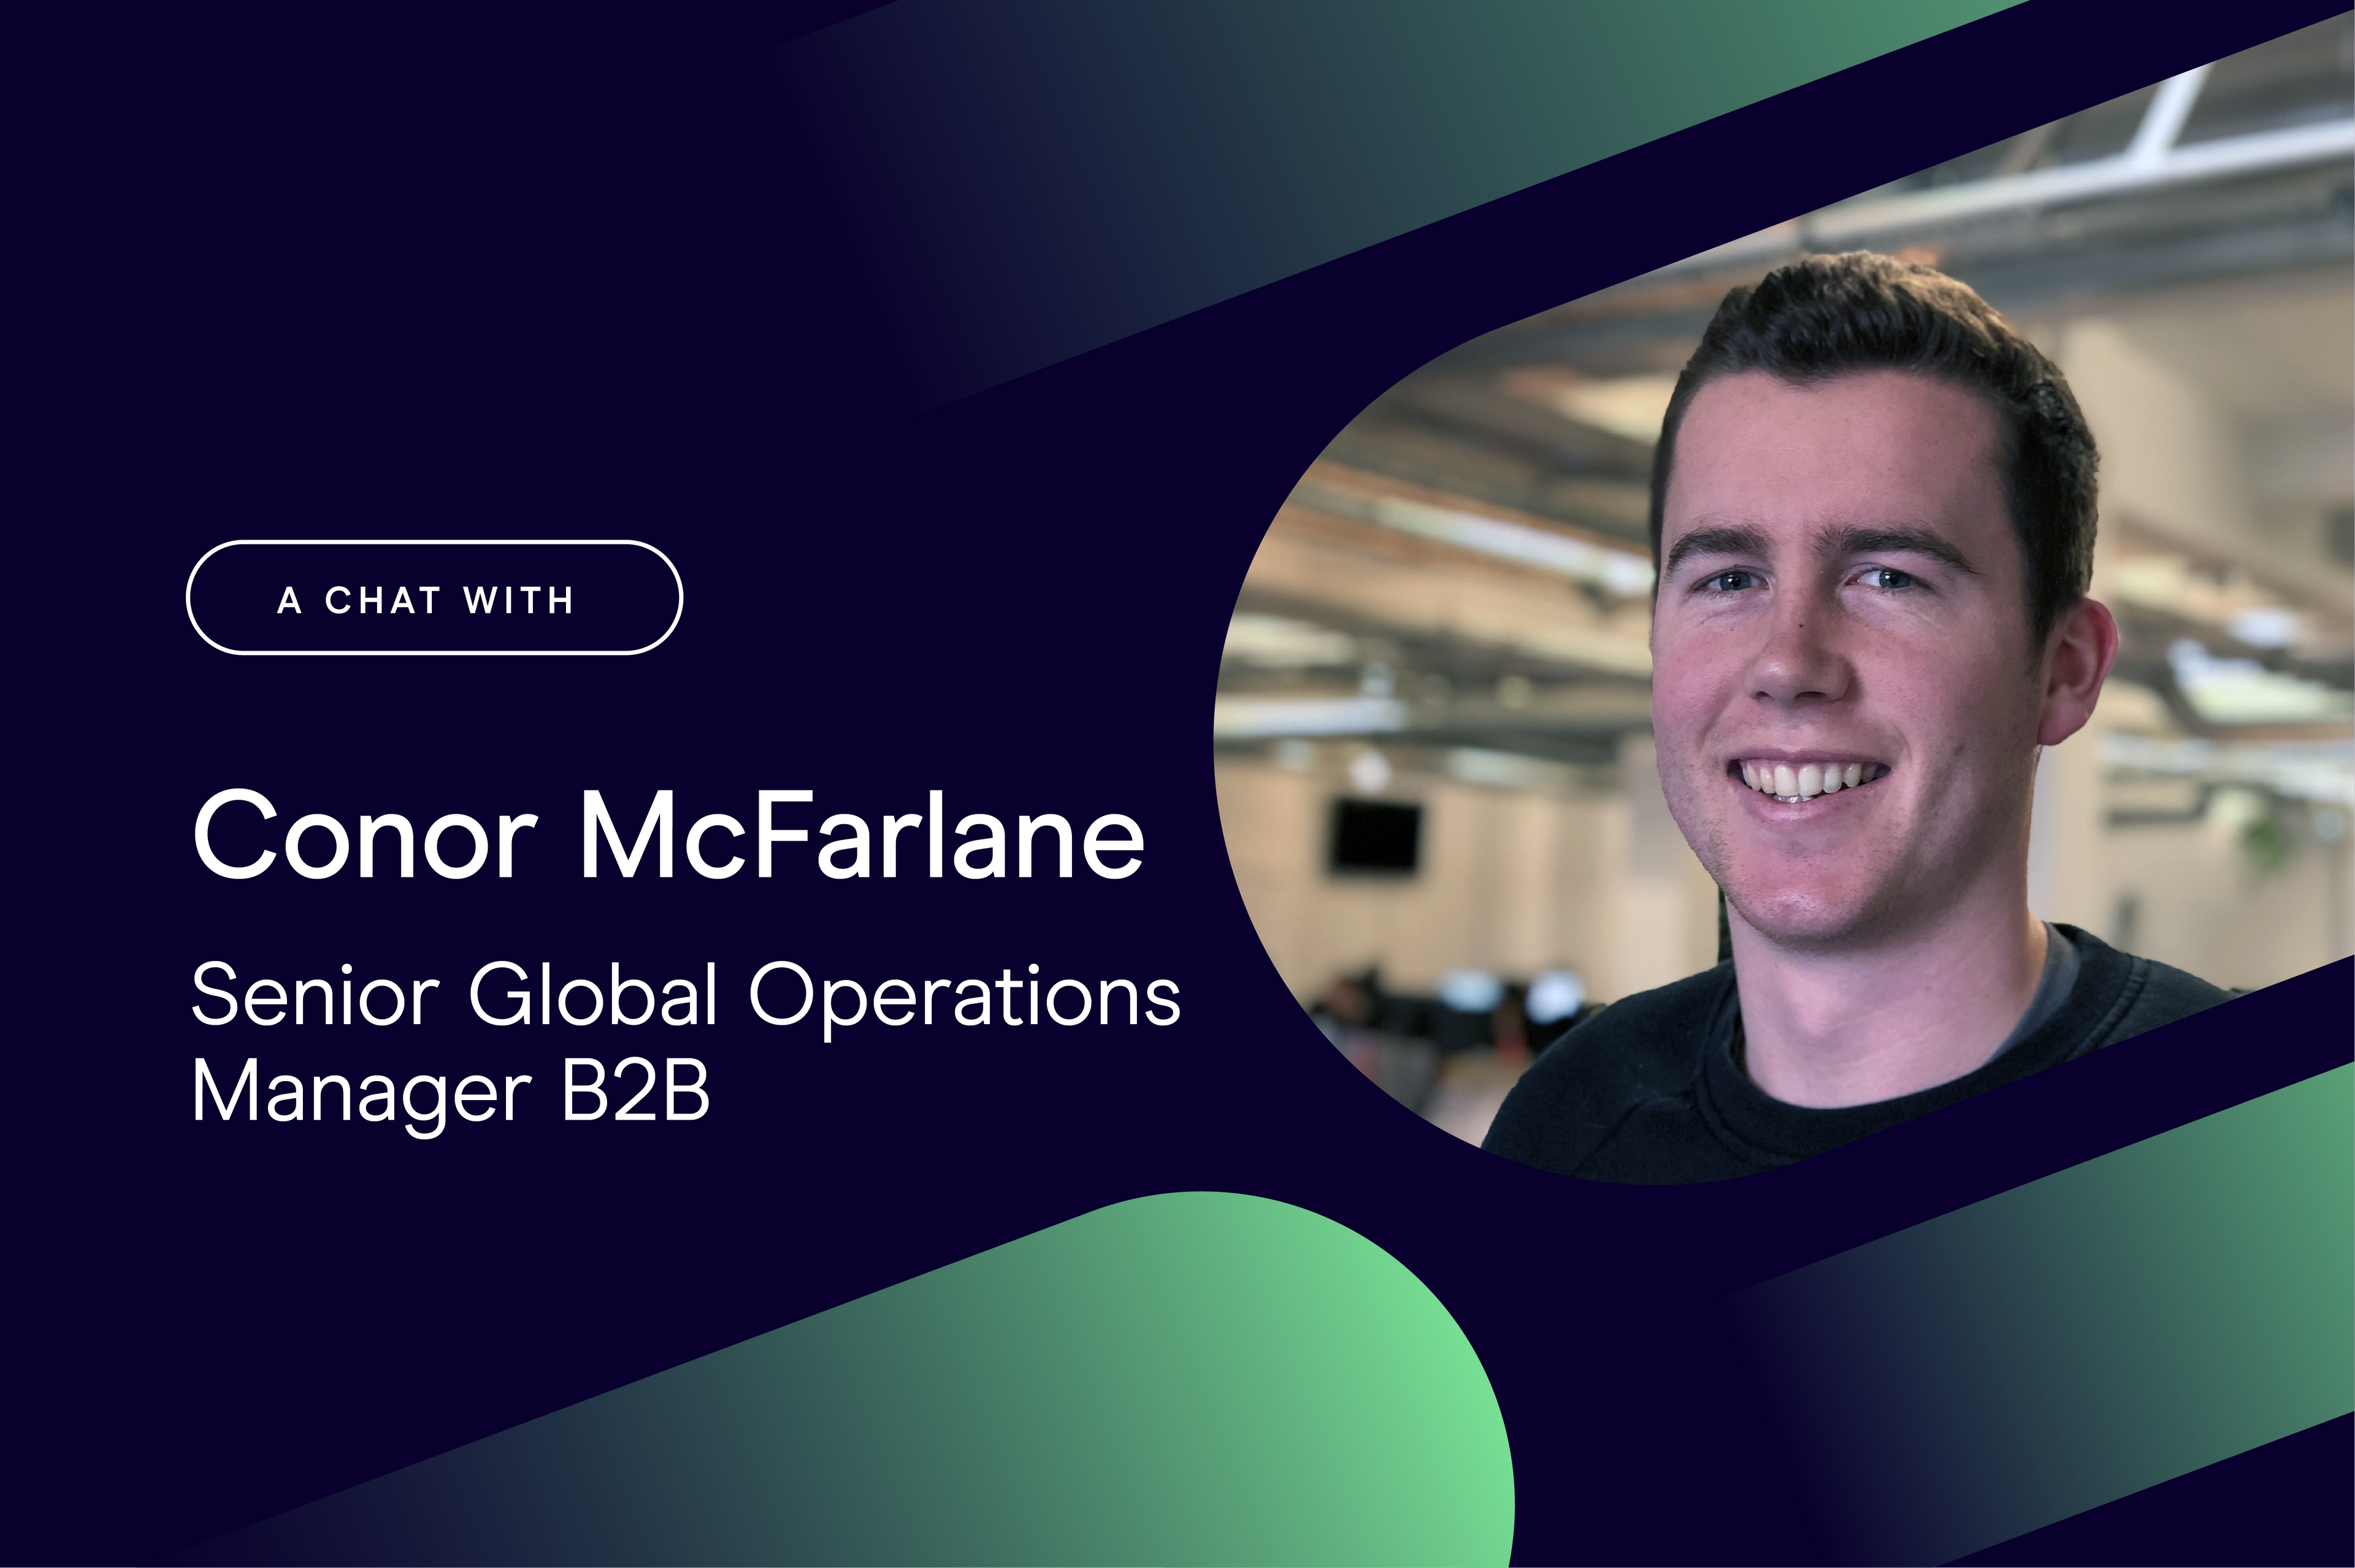 Office Hybrid in LONDON: An interview with Conor McFarlane, Senior Global Operations Manager B2B